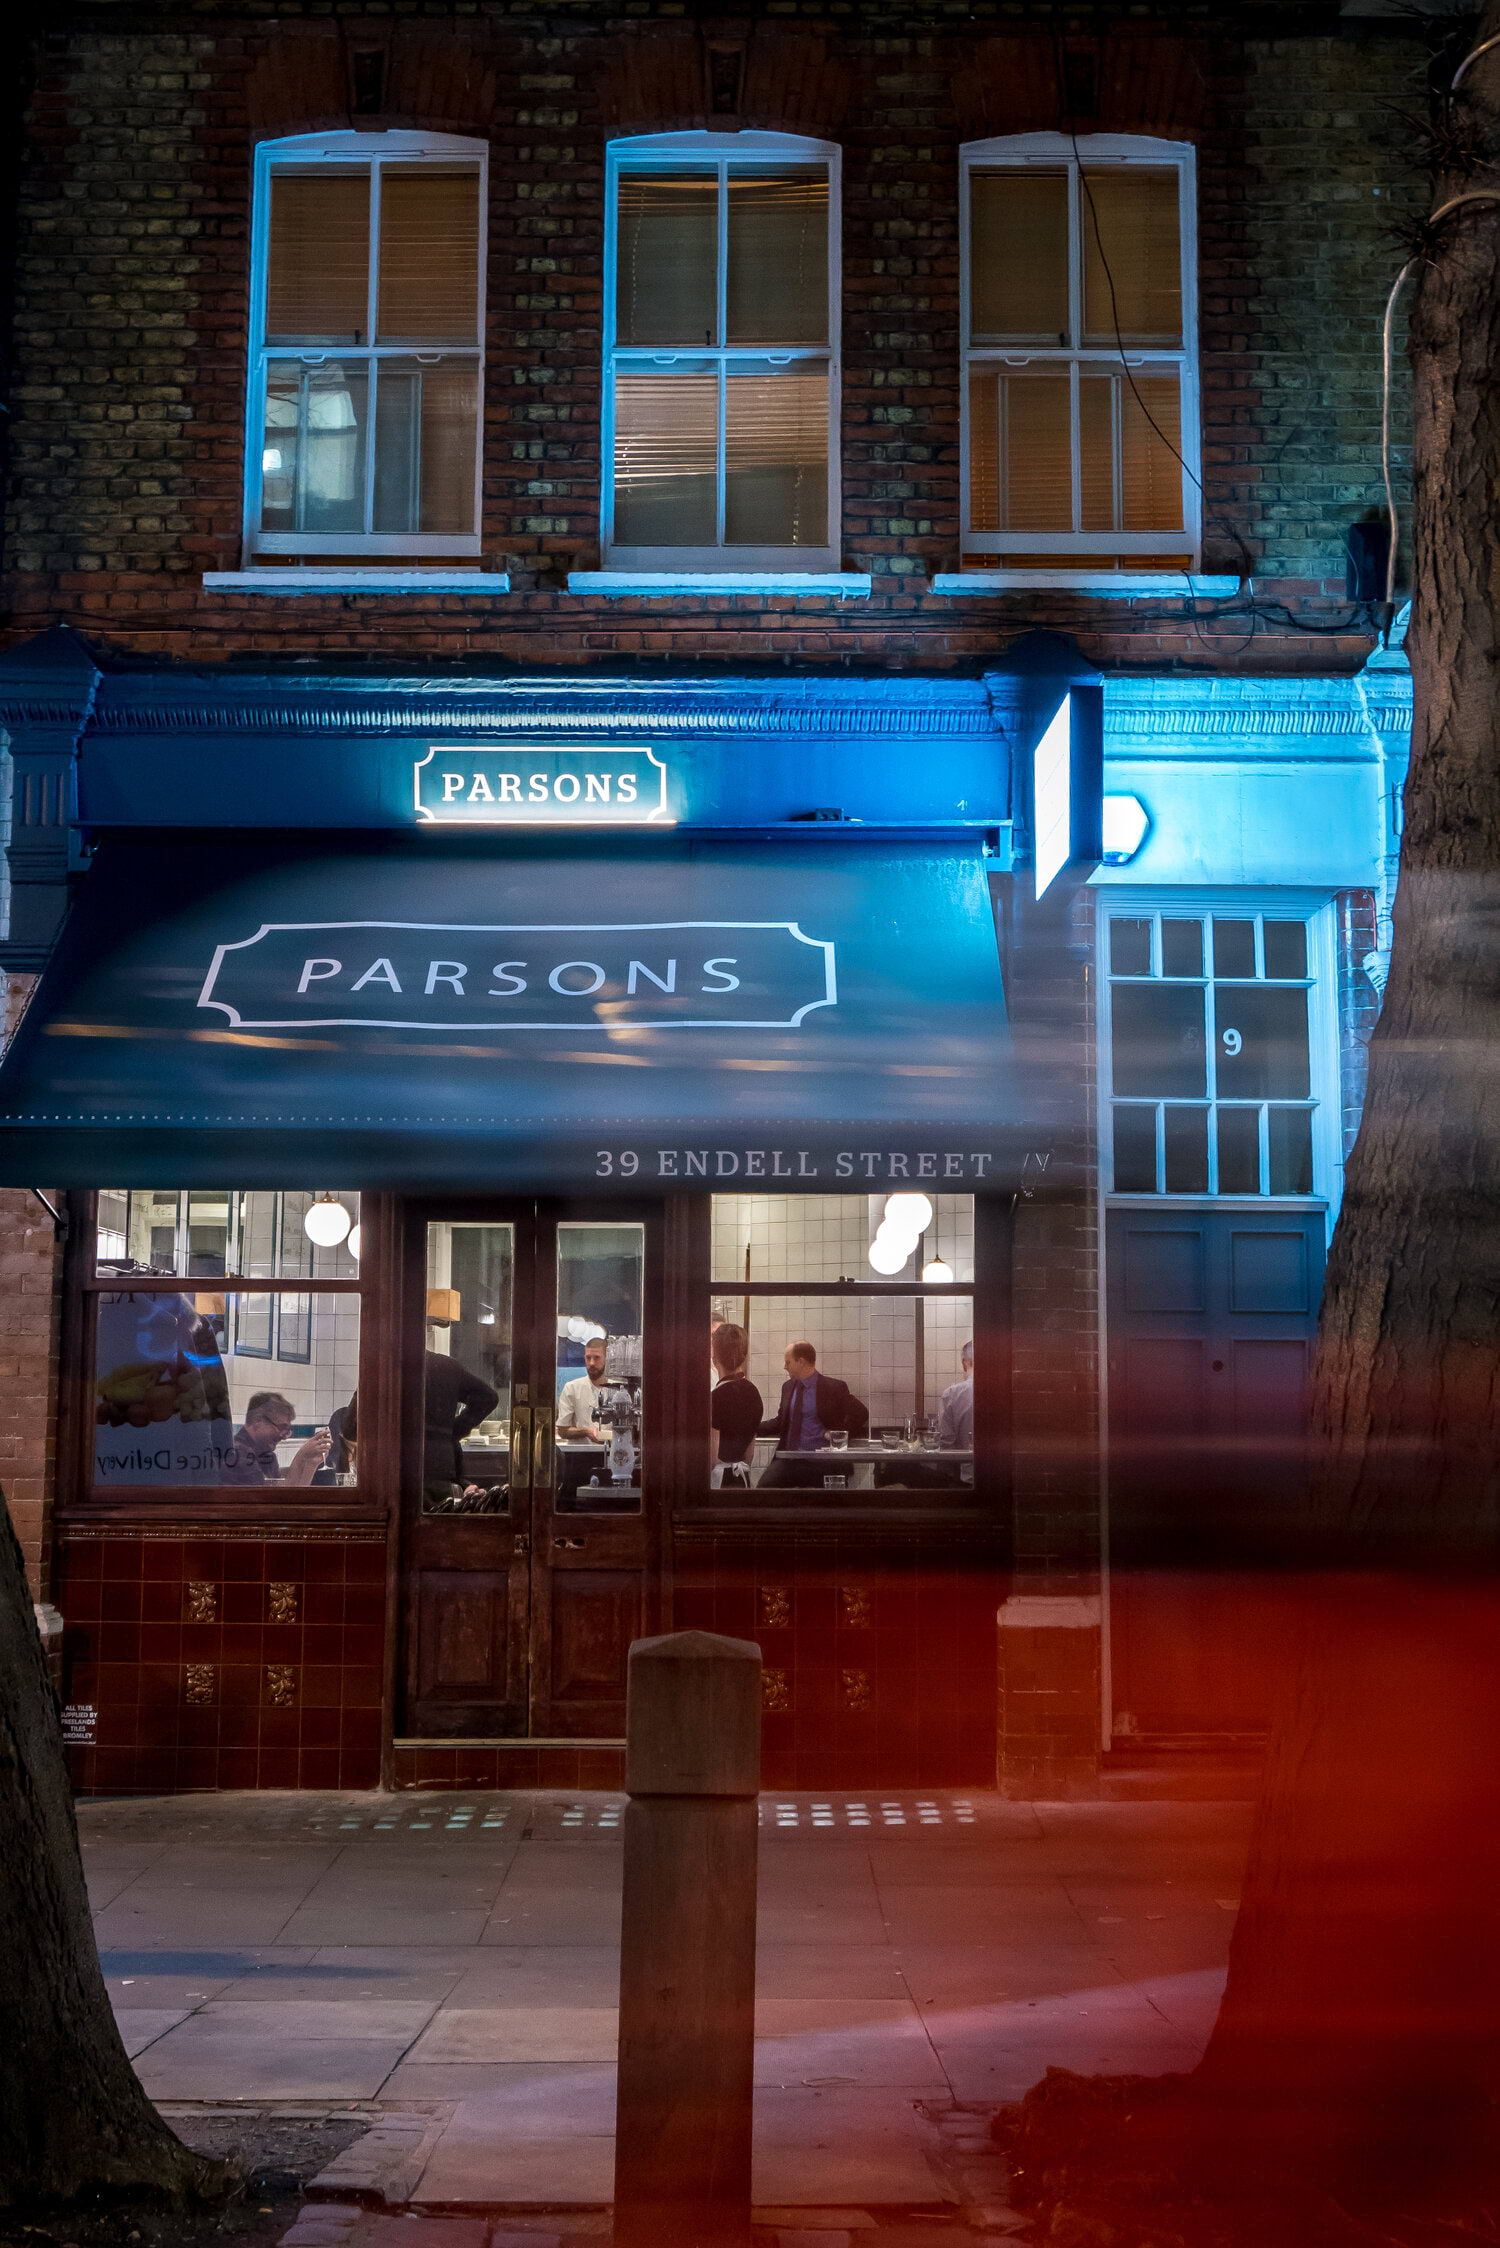 Parsons – A day in Covent Garden